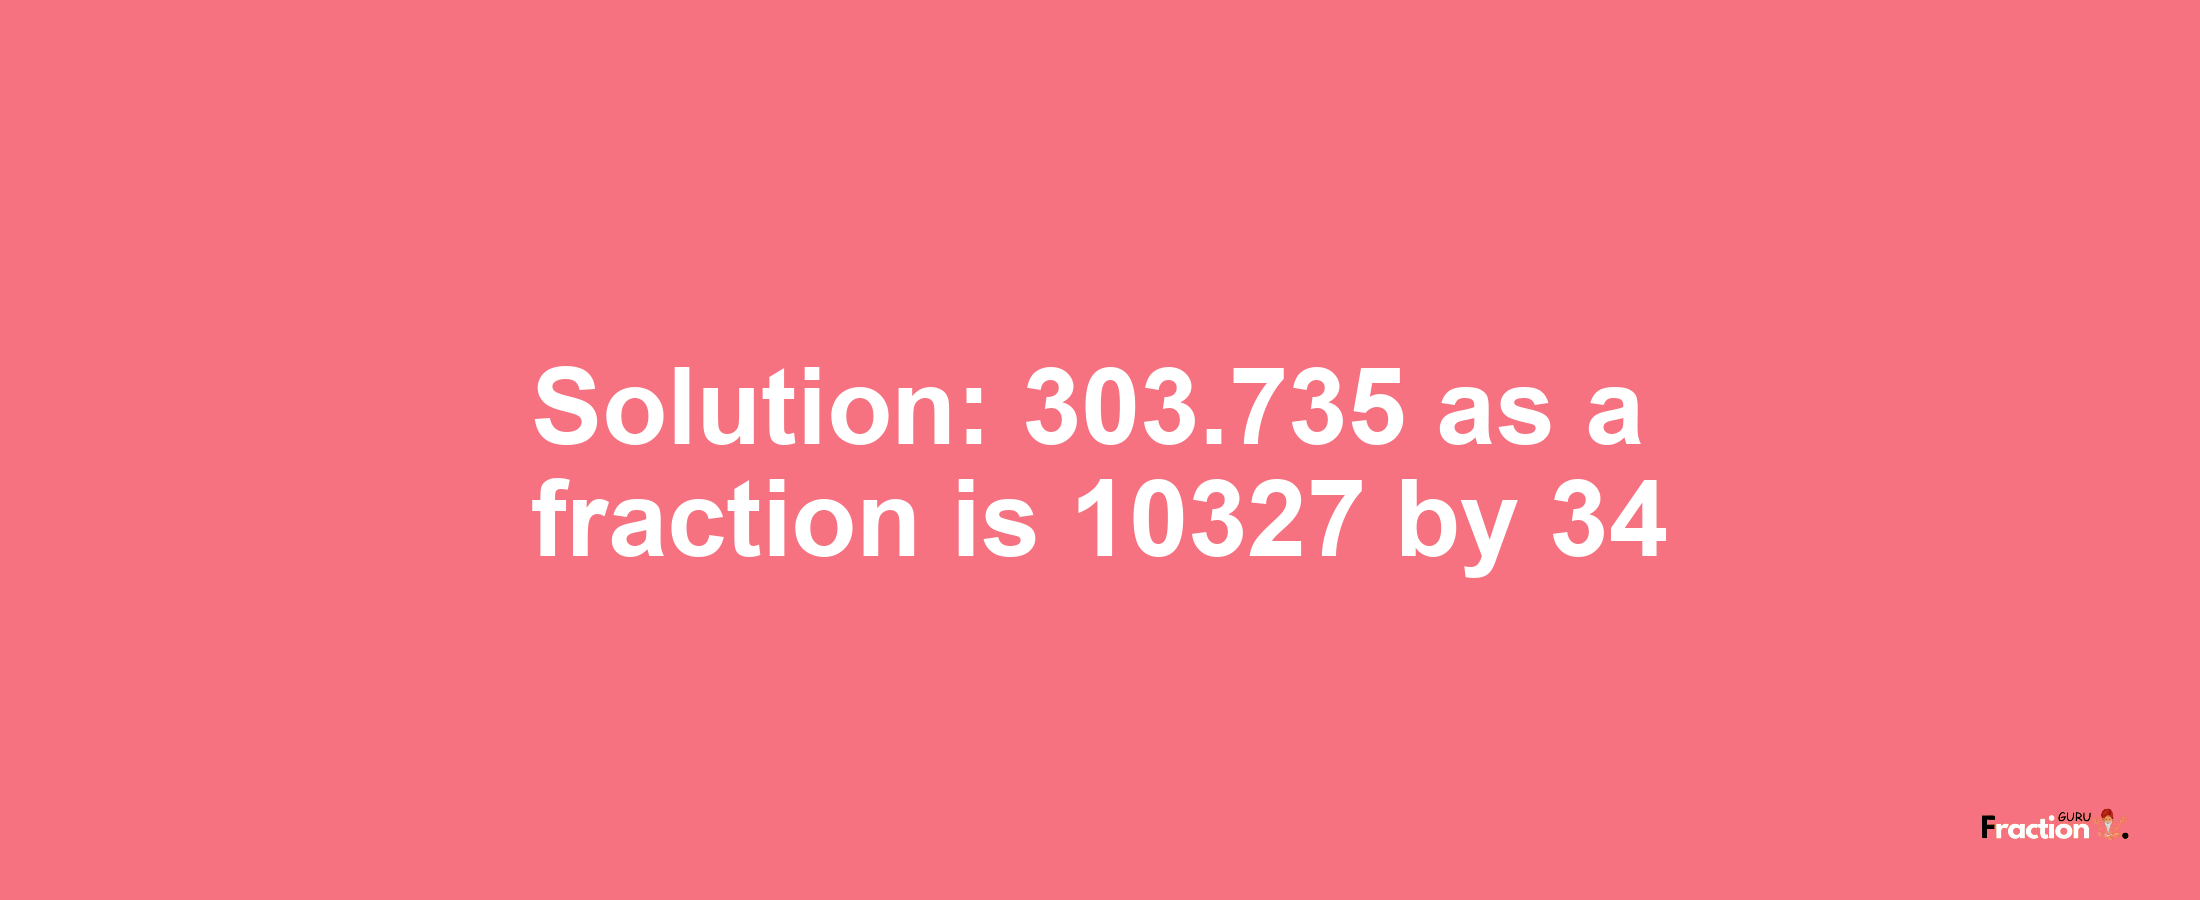 Solution:303.735 as a fraction is 10327/34